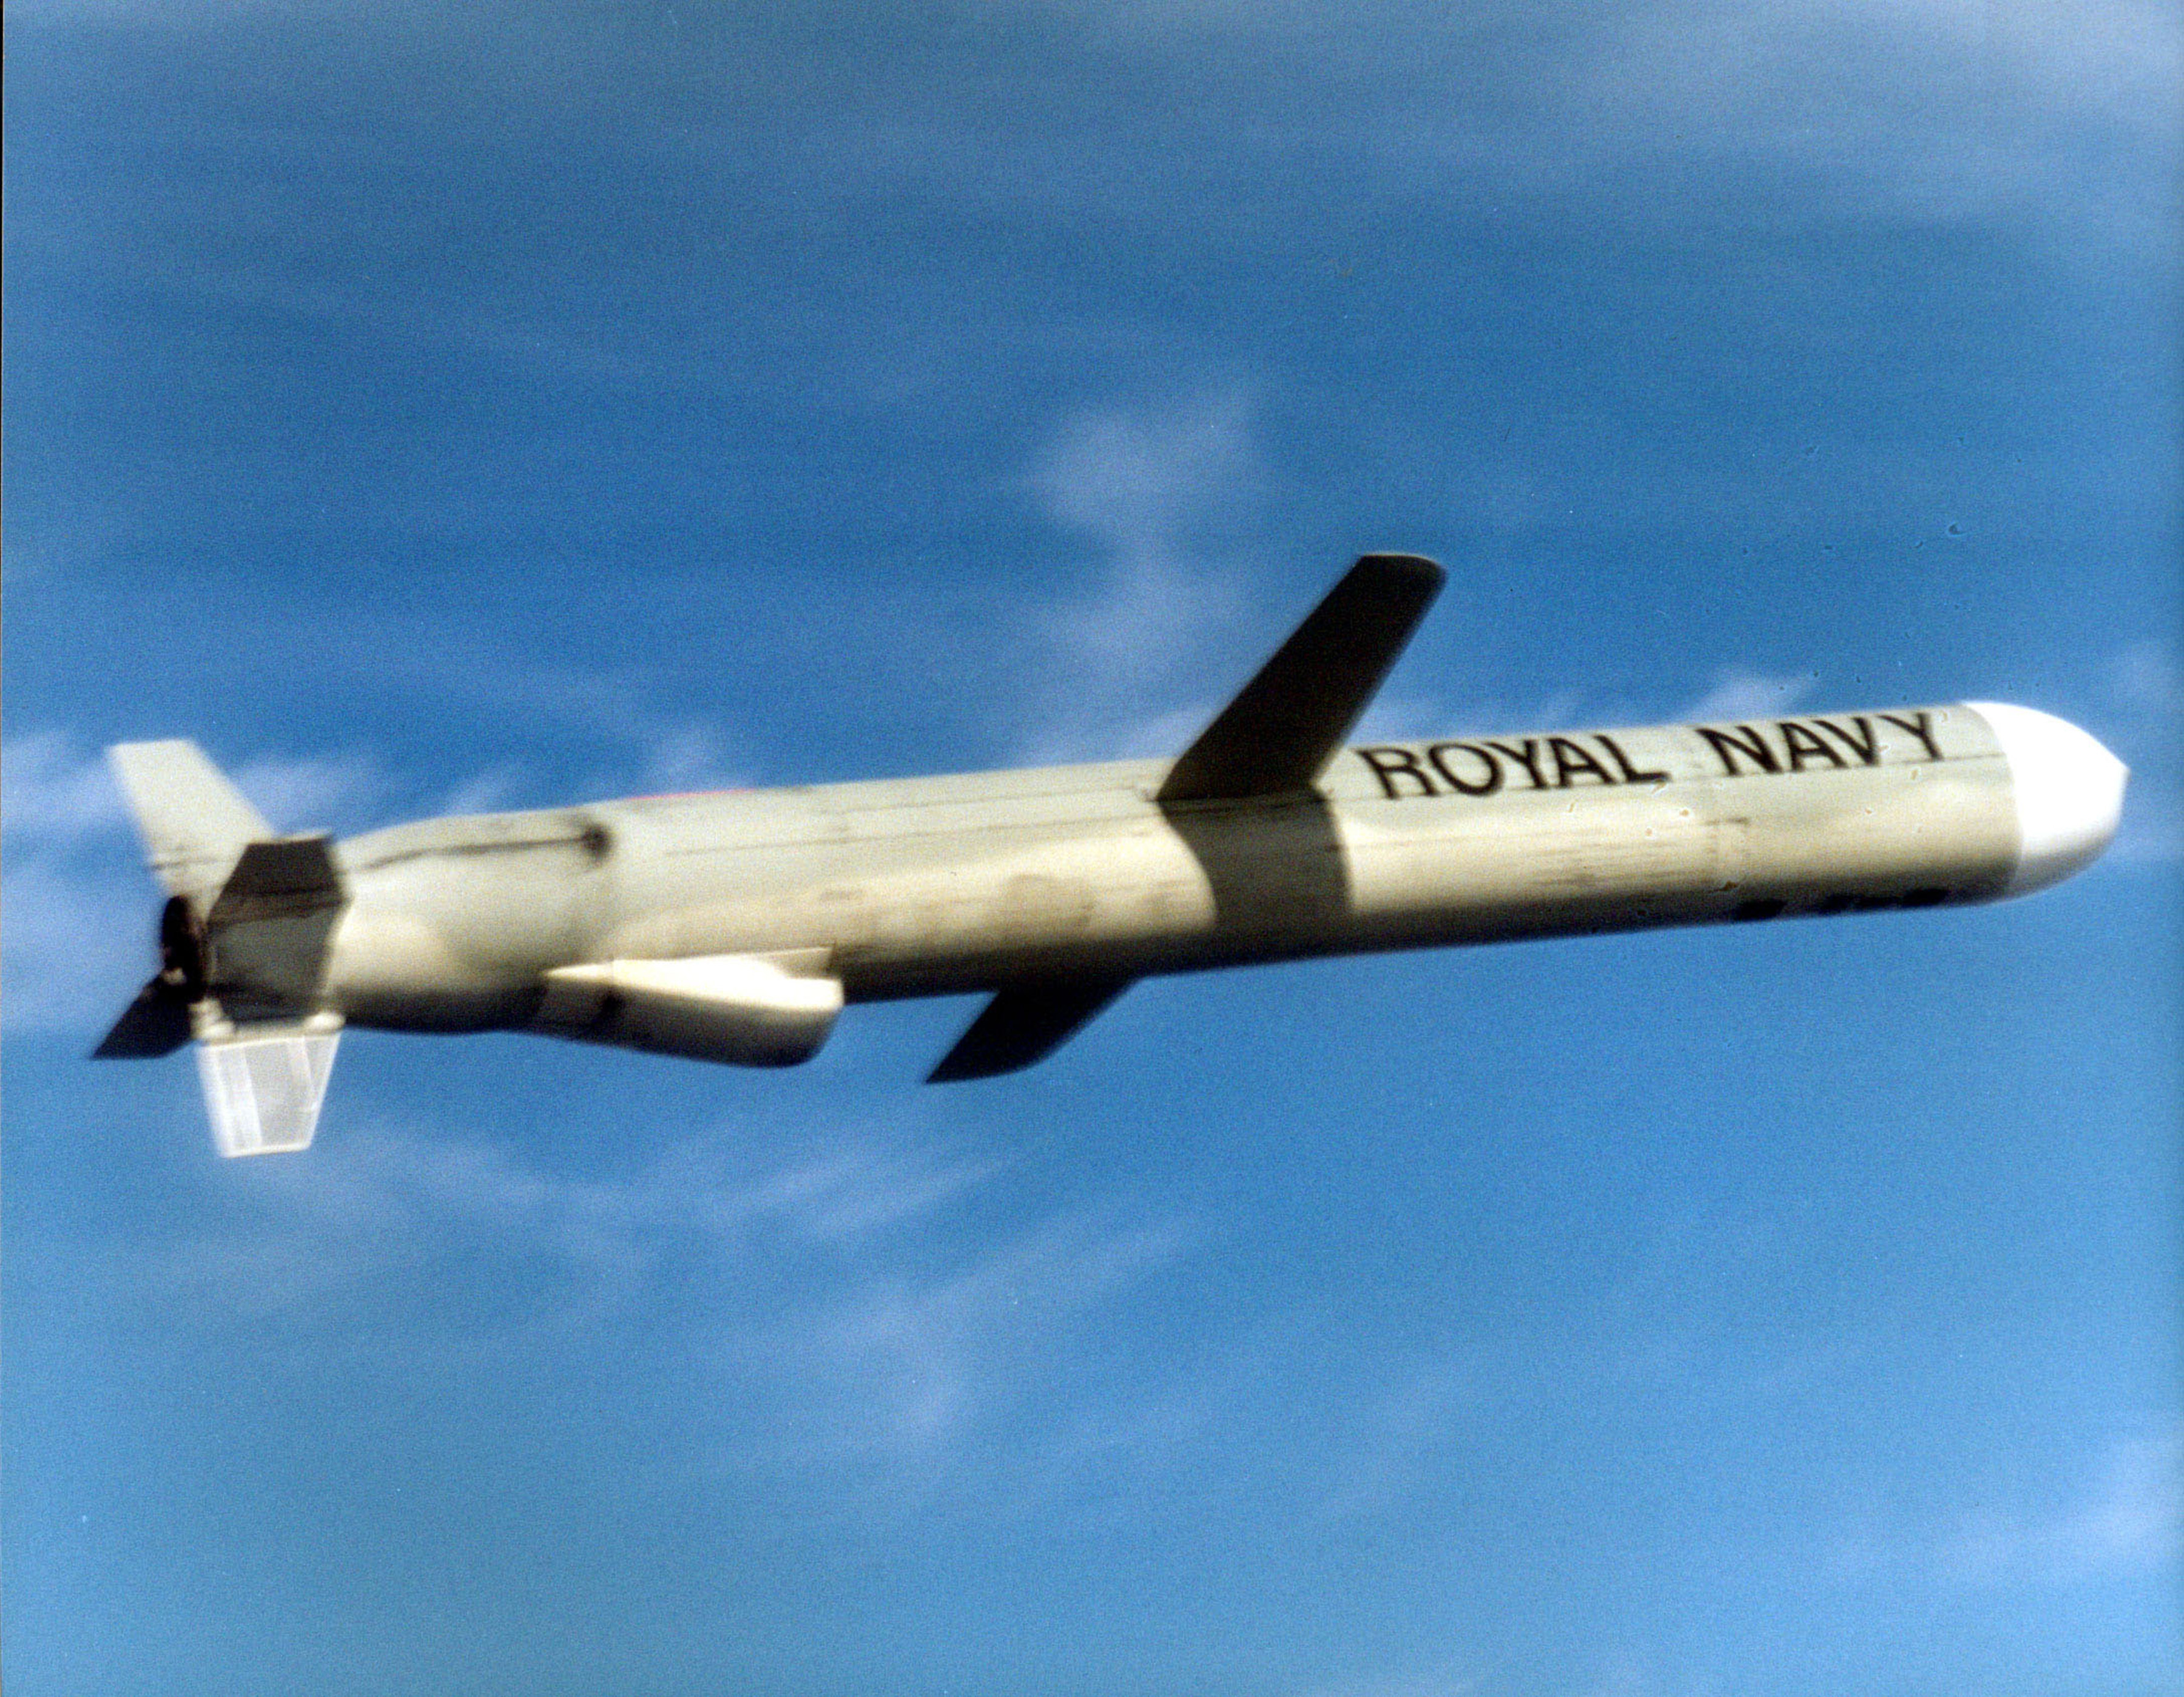 Tomahawk_Land_Attack_Missile_%28_Cruise_Missile%29_%28TLAM%29_flying_through_the_air._12-04-2000_MOD_45138116.jpg